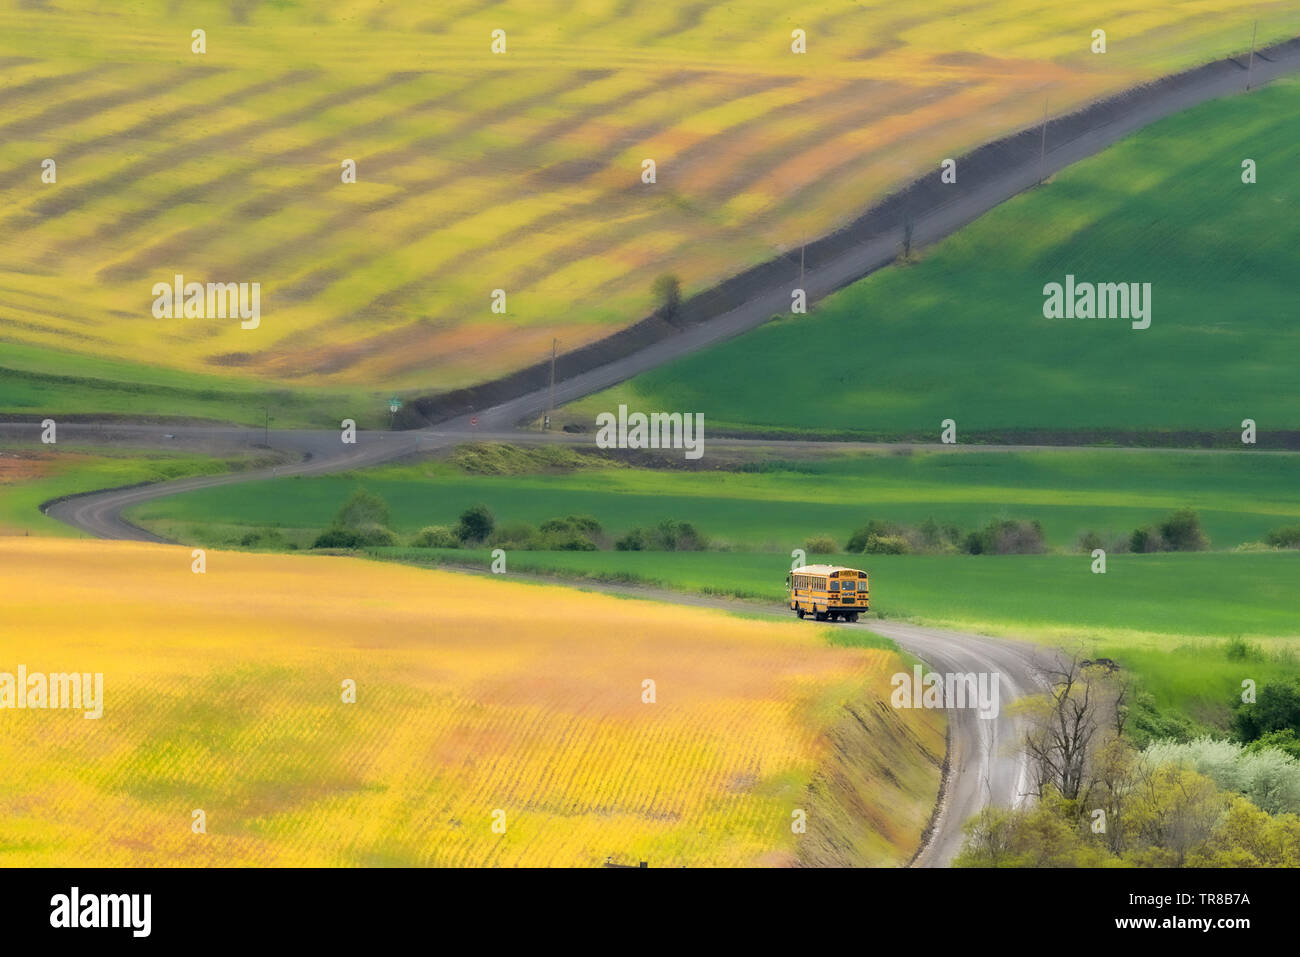 Surreal image of a school bus on a rural road in Umatilla County, Oregon. Stock Photo